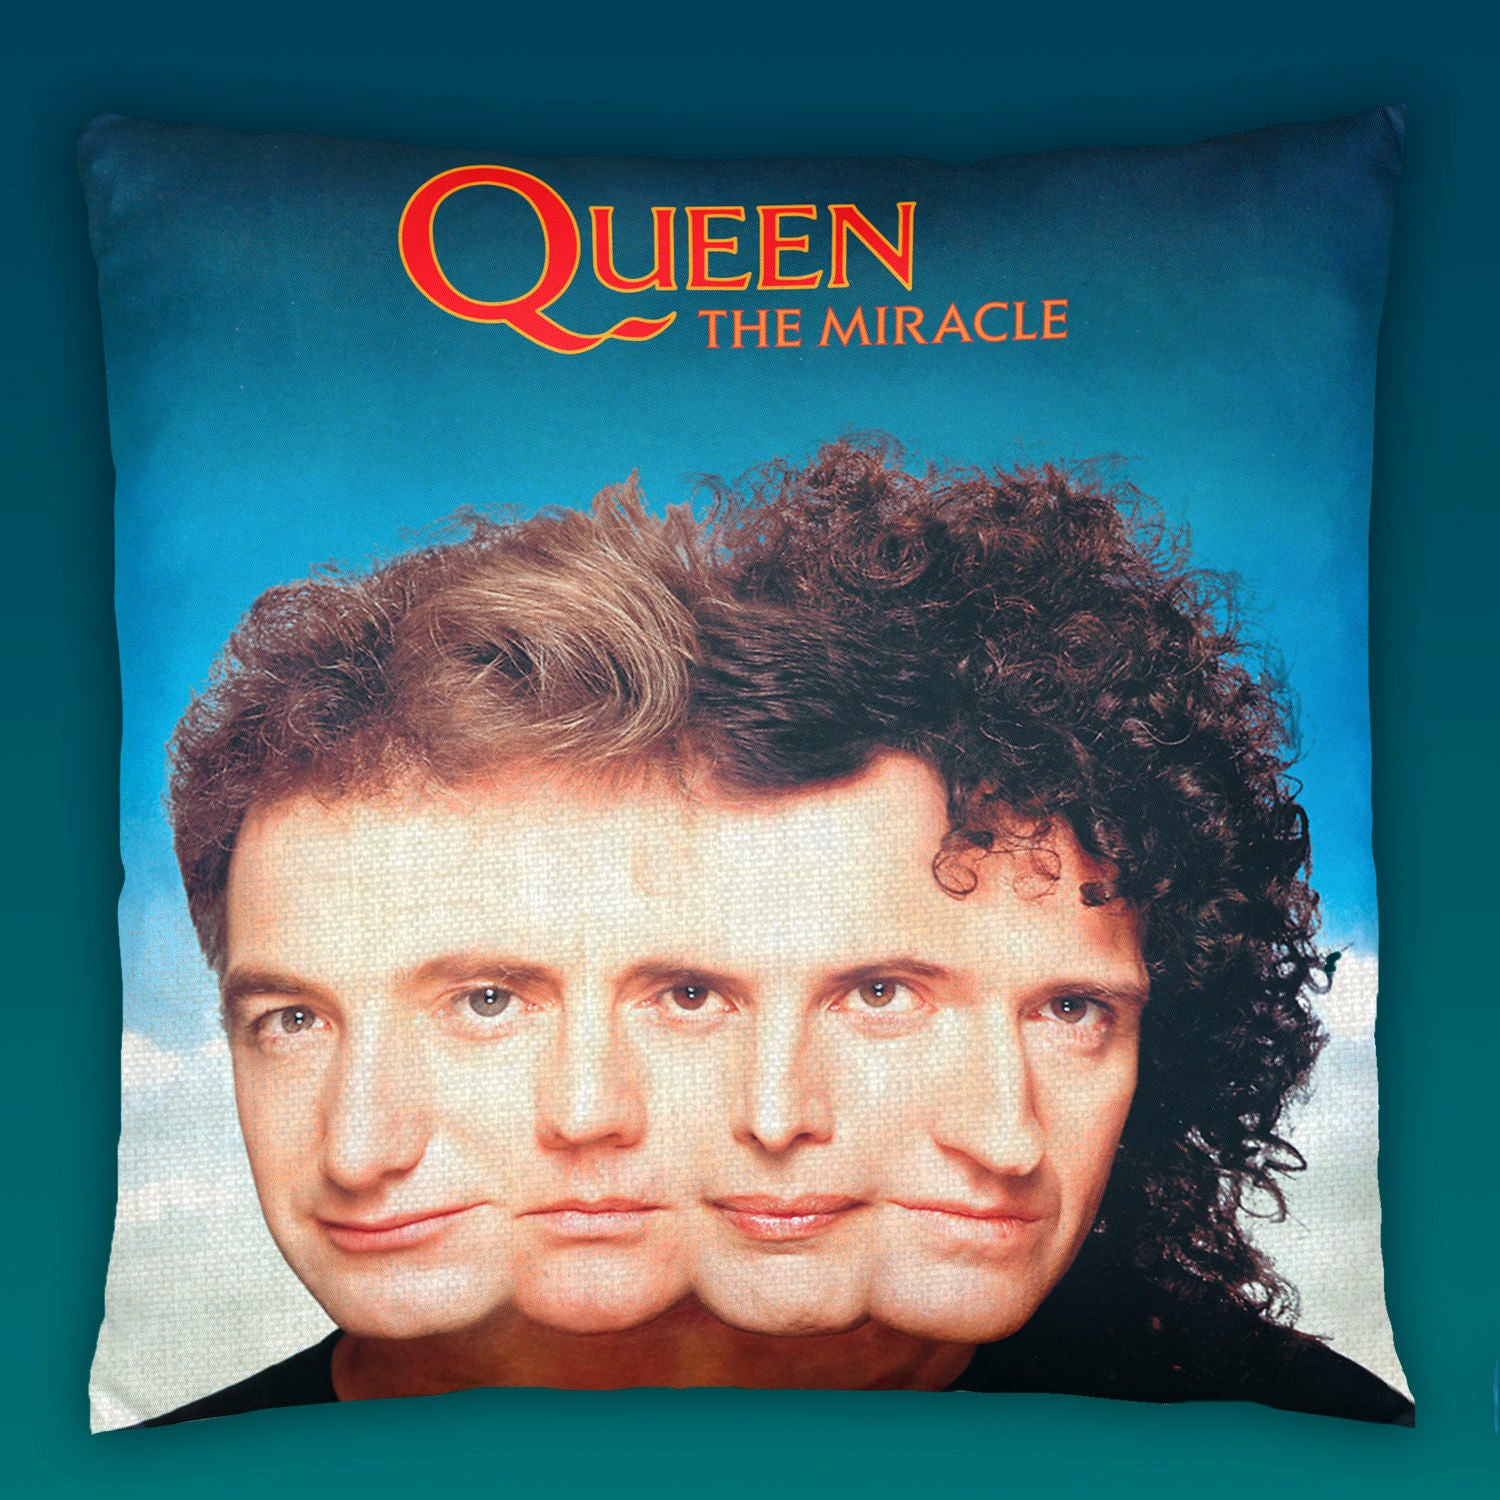 Queen - 'The Miracle' Cushion Cover